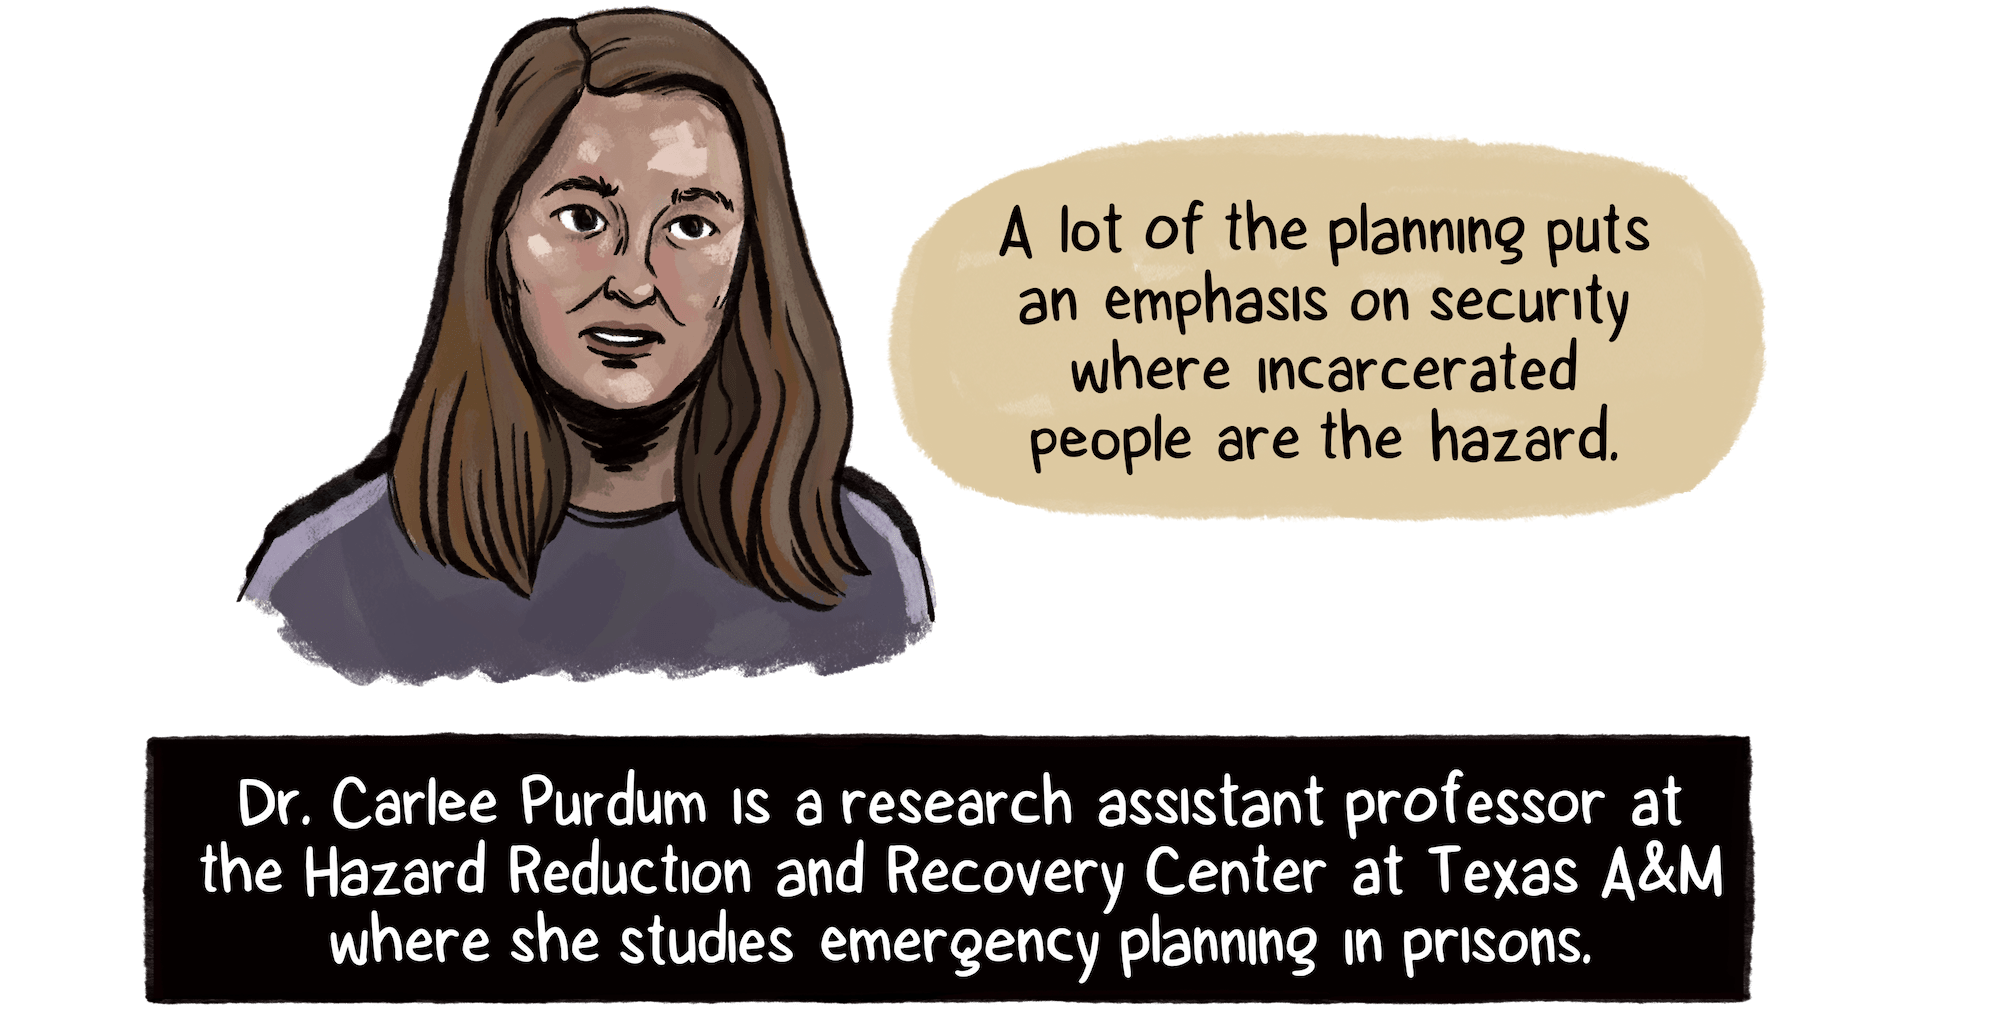 “A lot of the planning puts an emphasis on security where incarcerated people are the hazard,” says Dr. Carlee Purdum, a woman with long brown hair and medium-light skin tone. Purdum studies emergency planning in prisons at Texas A&M.